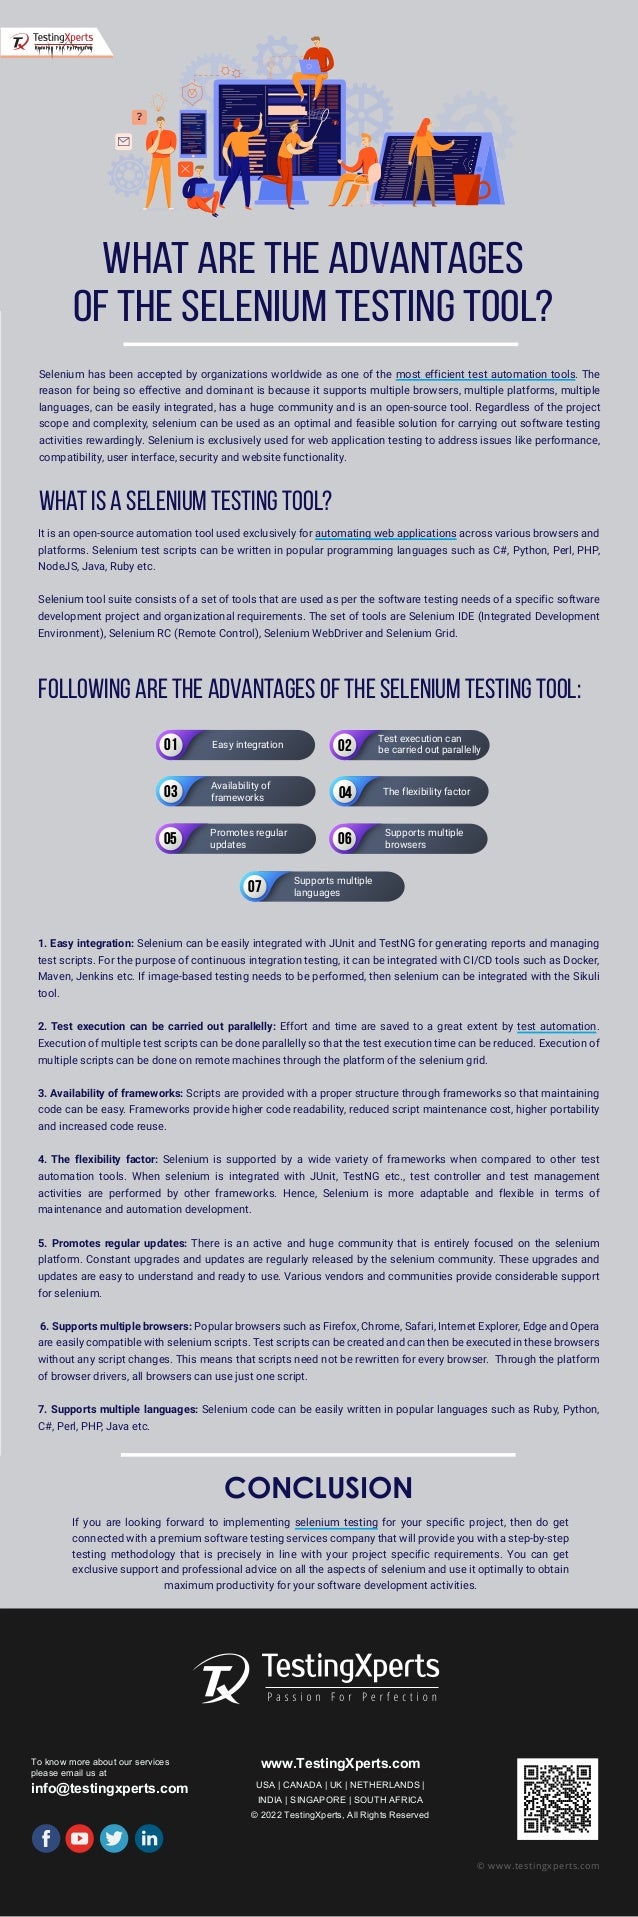 CONCLUSION
If you are looking forward to implementing selenium testing for your specific project, then do get
connected with a premium software testing services company that will provide you with a step-by-step
testing methodology that is precisely in line with your project specific requirements. You can get
exclusive support and professional advice on all the aspects of selenium and use it optimally to obtain
maximum productivity for your software development activities.
To know more about our services
please email us at
info@testingxperts.com
www.TestingXperts.com
USA | CANADA | UK | NETHERLANDS |
INDIA | SINGAPORE | SOUTH AFRICA
© 2022 TestingXperts, All Rights Reserved
© www.testingxperts.com
Selenium has been accepted by organizations worldwide as one of the most efficient test automation tools. The
reason for being so effective and dominant is because it supports multiple browsers, multiple platforms, multiple
languages, can be easily integrated, has a huge community and is an open-source tool. Regardless of the project
scope and complexity, selenium can be used as an optimal and feasible solution for carrying out software testing
activities rewardingly. Selenium is exclusively used for web application testing to address issues like performance,
compatibility, user interface, security and website functionality.
What is a Selenium testing tool?
What are the Advantages
of the selenium testing tool?
It is an open-source automation tool used exclusively for automating web applications across various browsers and
platforms. Selenium test scripts can be written in popular programming languages such as C#, Python, Perl, PHP,
NodeJS, Java, Ruby etc.
Selenium tool suite consists of a set of tools that are used as per the software testing needs of a specific software
development project and organizational requirements. The set of tools are Selenium IDE (Integrated Development
Environment), Selenium RC (Remote Control), Selenium WebDriver and Selenium Grid.
Following are the advantages of the selenium testing tool:
1. Easy integration: Selenium can be easily integrated with JUnit and TestNG for generating reports and managing
test scripts. For the purpose of continuous integration testing, it can be integrated with CI/CD tools such as Docker,
Maven, Jenkins etc. If image-based testing needs to be performed, then selenium can be integrated with the Sikuli
tool.
2. Test execution can be carried out parallelly: Effort and time are saved to a great extent by test automation.
Execution of multiple test scripts can be done parallelly so that the test execution time can be reduced. Execution of
multiple scripts can be done on remote machines through the platform of the selenium grid.
3. Availability of frameworks: Scripts are provided with a proper structure through frameworks so that maintaining
code can be easy. Frameworks provide higher code readability, reduced script maintenance cost, higher portability
and increased code reuse.
4. The flexibility factor: Selenium is supported by a wide variety of frameworks when compared to other test
automation tools. When selenium is integrated with JUnit, TestNG etc., test controller and test management
activities are performed by other frameworks. Hence, Selenium is more adaptable and flexible in terms of
maintenance and automation development.
5. Promotes regular updates: There is an active and huge community that is entirely focused on the selenium
platform. Constant upgrades and updates are regularly released by the selenium community. These upgrades and
updates are easy to understand and ready to use. Various vendors and communities provide considerable support
for selenium.
6. Supports multiple browsers: Popular browsers such as Firefox, Chrome, Safari, Internet Explorer, Edge and Opera
are easily compatible with selenium scripts. Test scripts can be created and can then be executed in these browsers
without any script changes. This means that scripts need not be rewritten for every browser. Through the platform
of browser drivers, all browsers can use just one script.
7. Supports multiple languages: Selenium code can be easily written in popular languages such as Ruby, Python,
C#, Perl, PHP, Java etc.
01 02
03 04
05 06
07
Easy integration
Test execution can
be carried out parallelly
Availability of
frameworks
The flexibility factor
Supports multiple
browsers
Promotes regular
updates
Supports multiple
languages
 